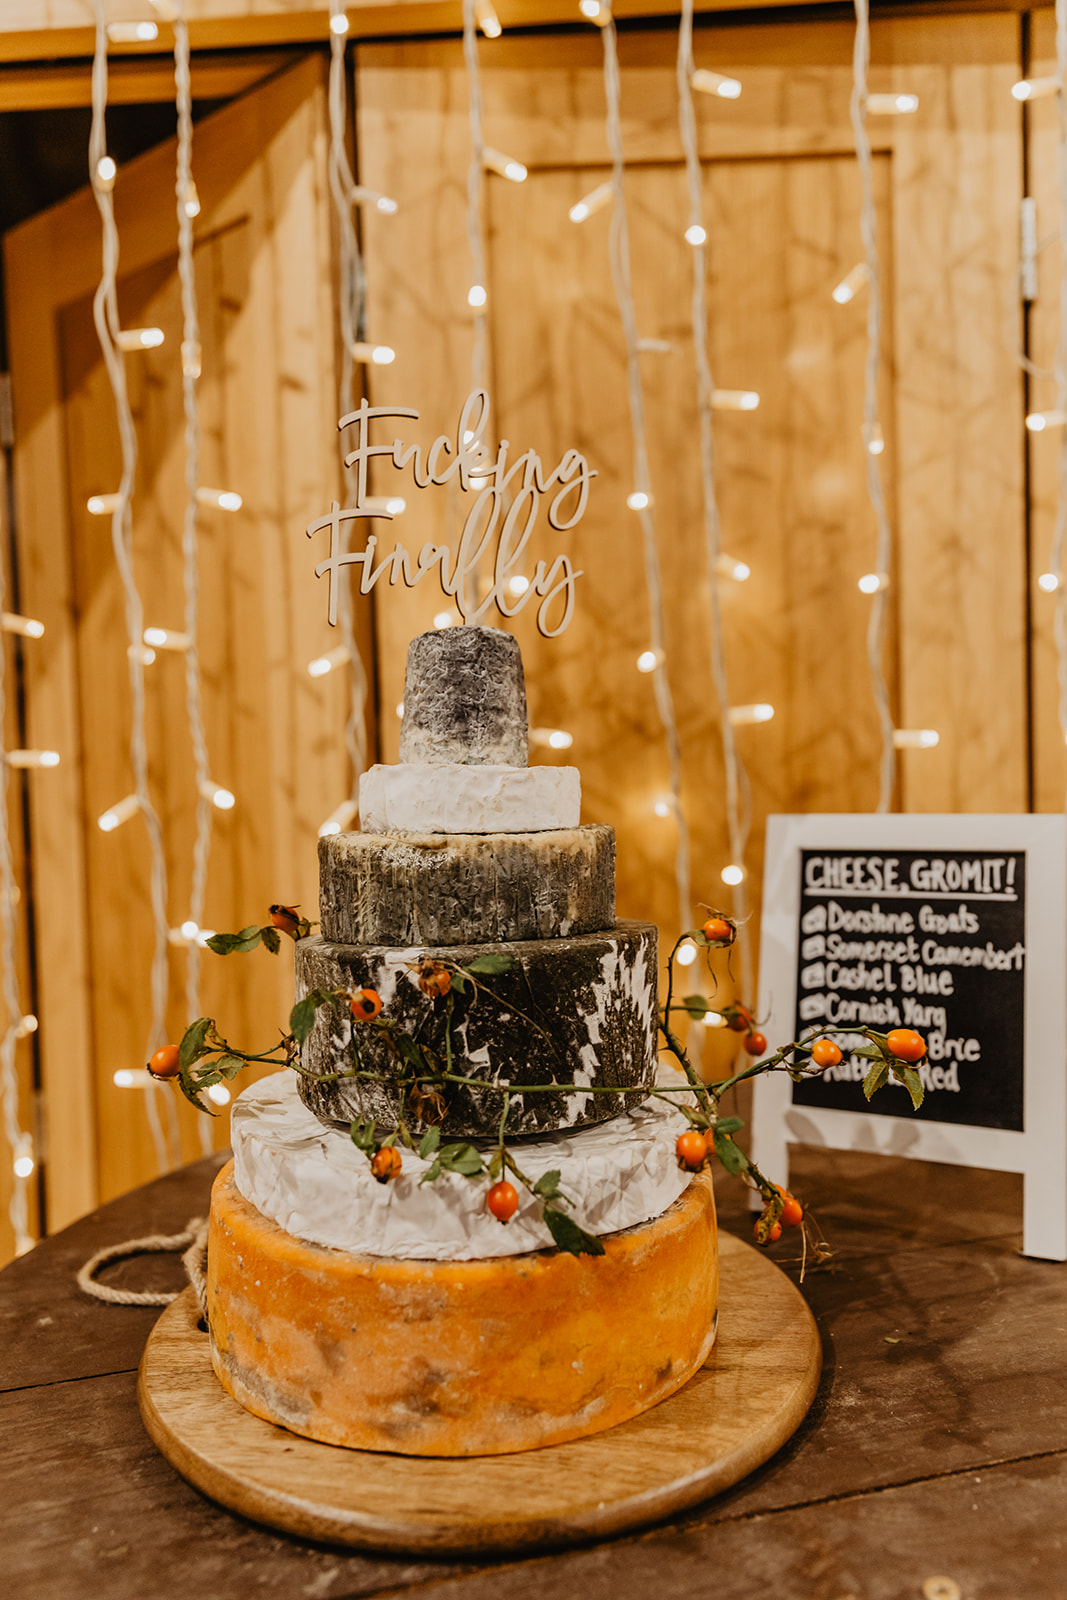 Cheese wedding cake at a wedding at Gilbert White's Hampshire. By OliveJoy Photography.